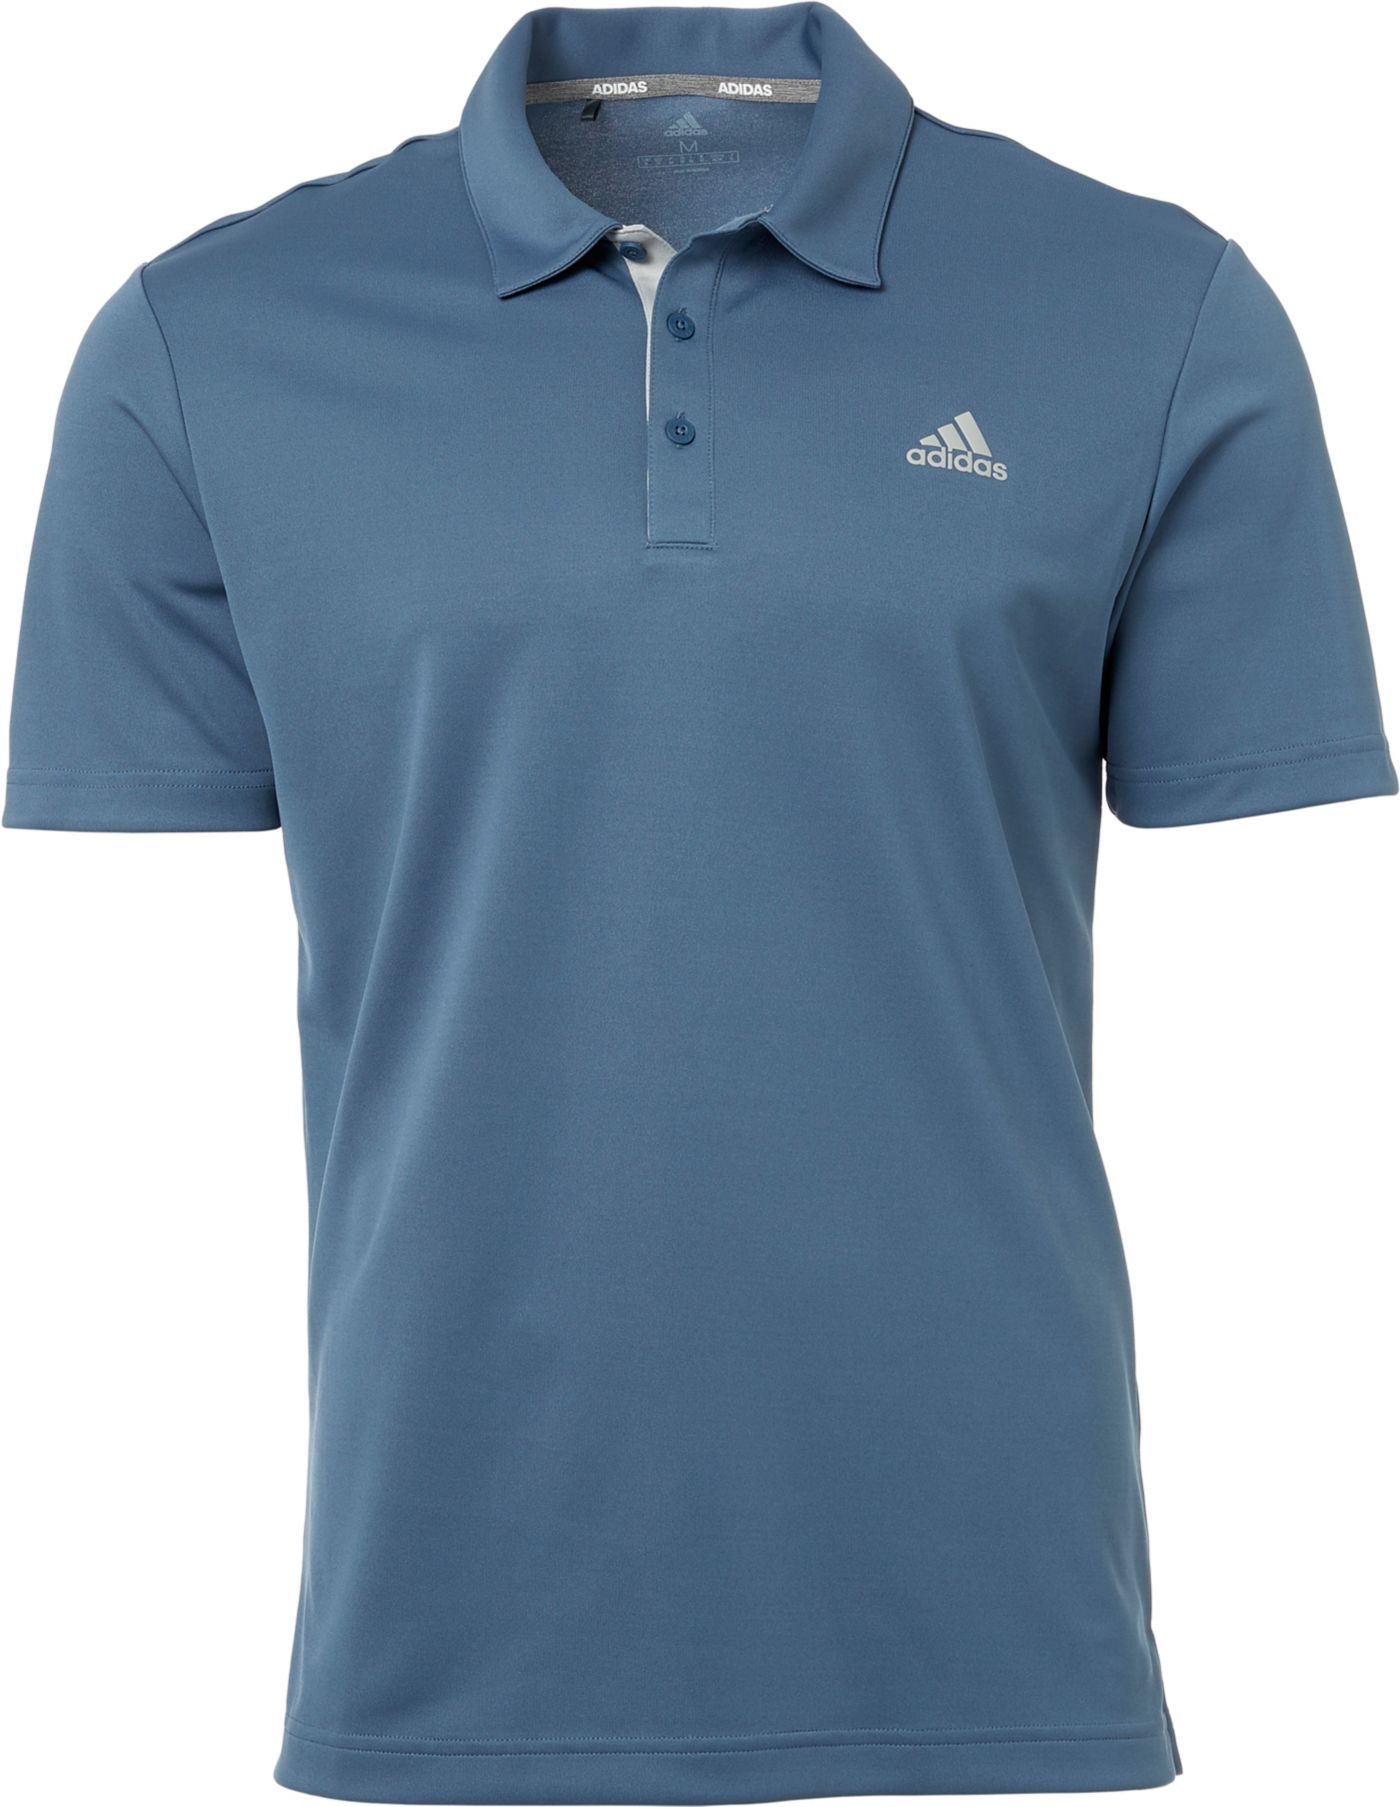 adidas Men's Drive Novelty Solid Golf Polo | DICK'S Sporting Goods